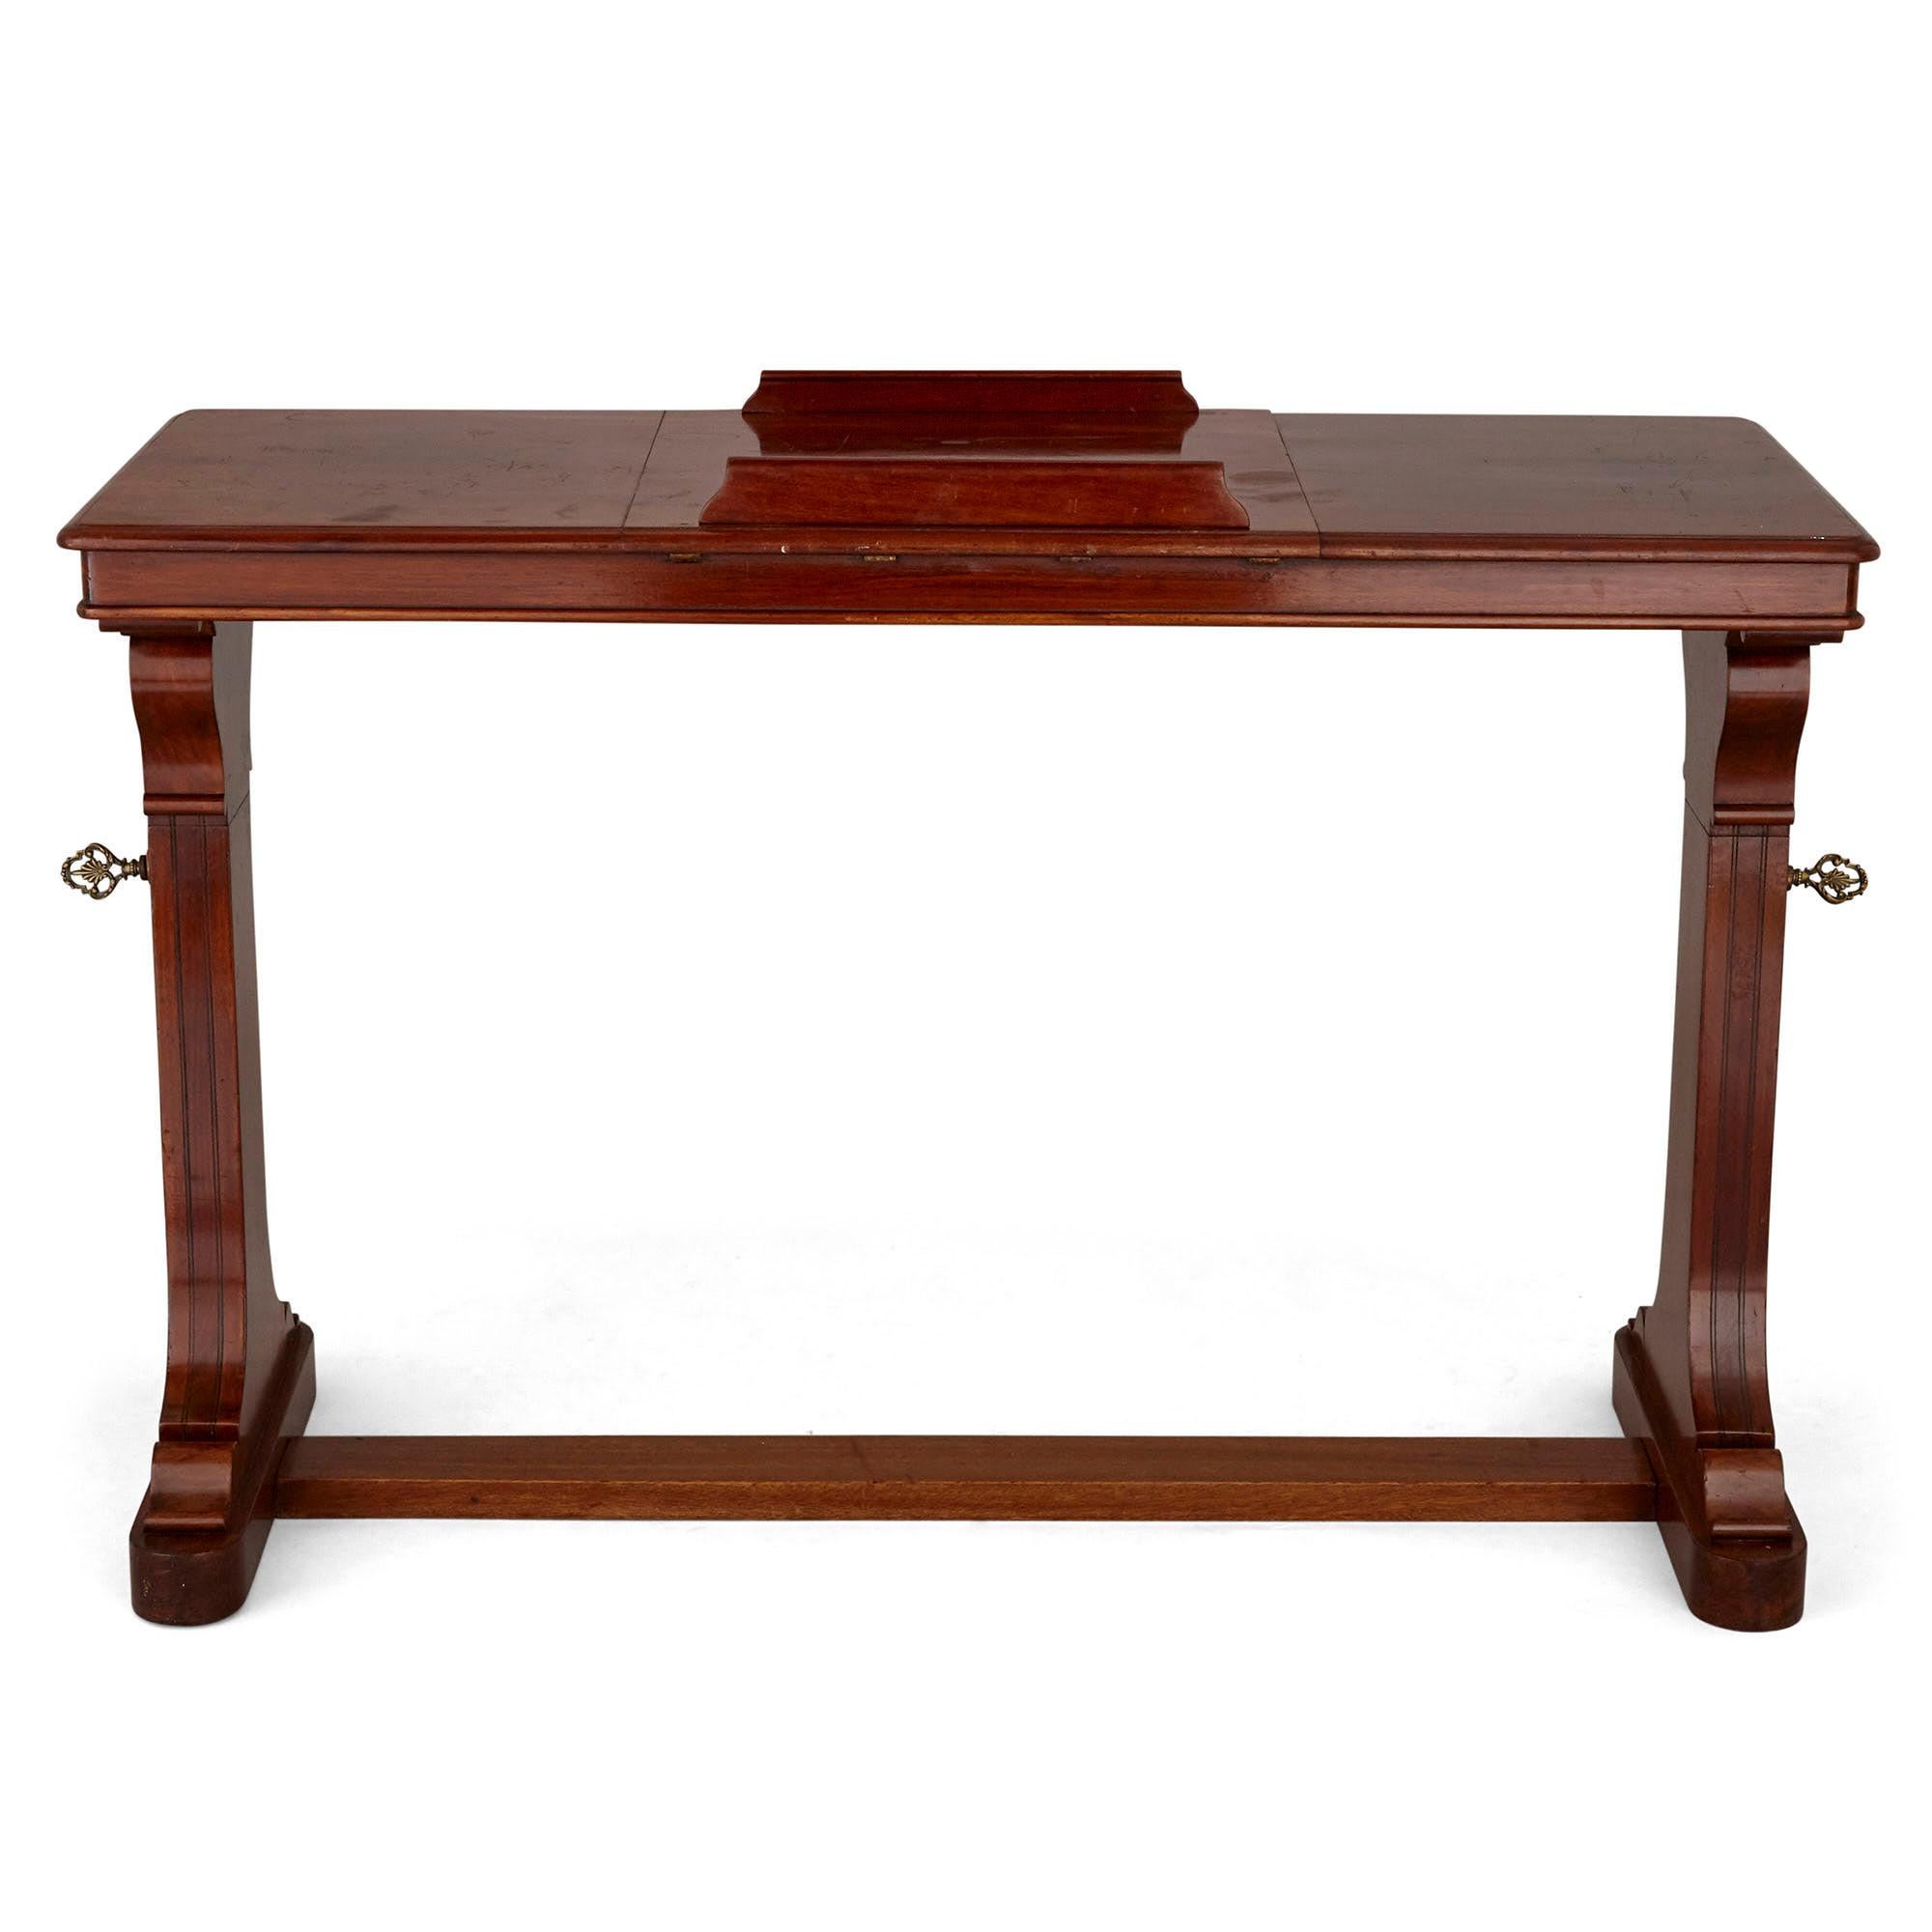 Antique English wooden desk with reading stand

Beautifully carved from wood, this Victorian English reading desk is supported by two legs with scrolled column-like profiles, with both legs joined by a central stretcher bar. The legs are